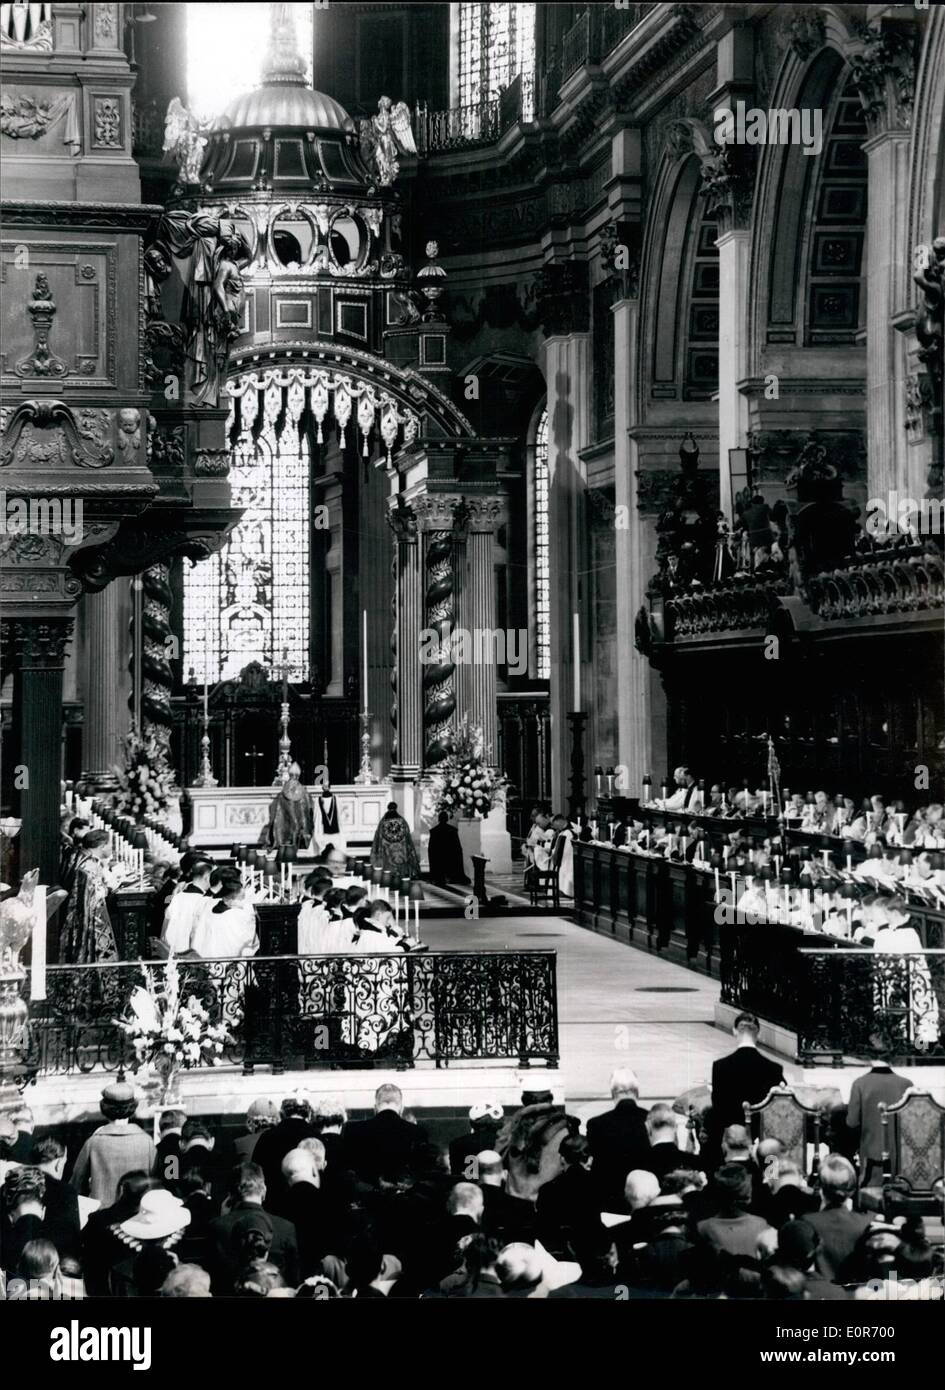 May 05, 1958 - Queen attends dedication at ST .Paul's. The Queen and the Duke of Edinburgh today attended a service for the re-dedication of the restored caster Bart of St. Paul's Cathedral and the dedication of the new High Altar as a memorial to the 35,451 men and women of the Commonwealth overseas who died in the two world wars. Photo shoes the  in the Cathedral during the blessing by the Archbishop of sanzerbury showing the Queen and the Duke of Edinburgh seated at prayer. Stock Photo